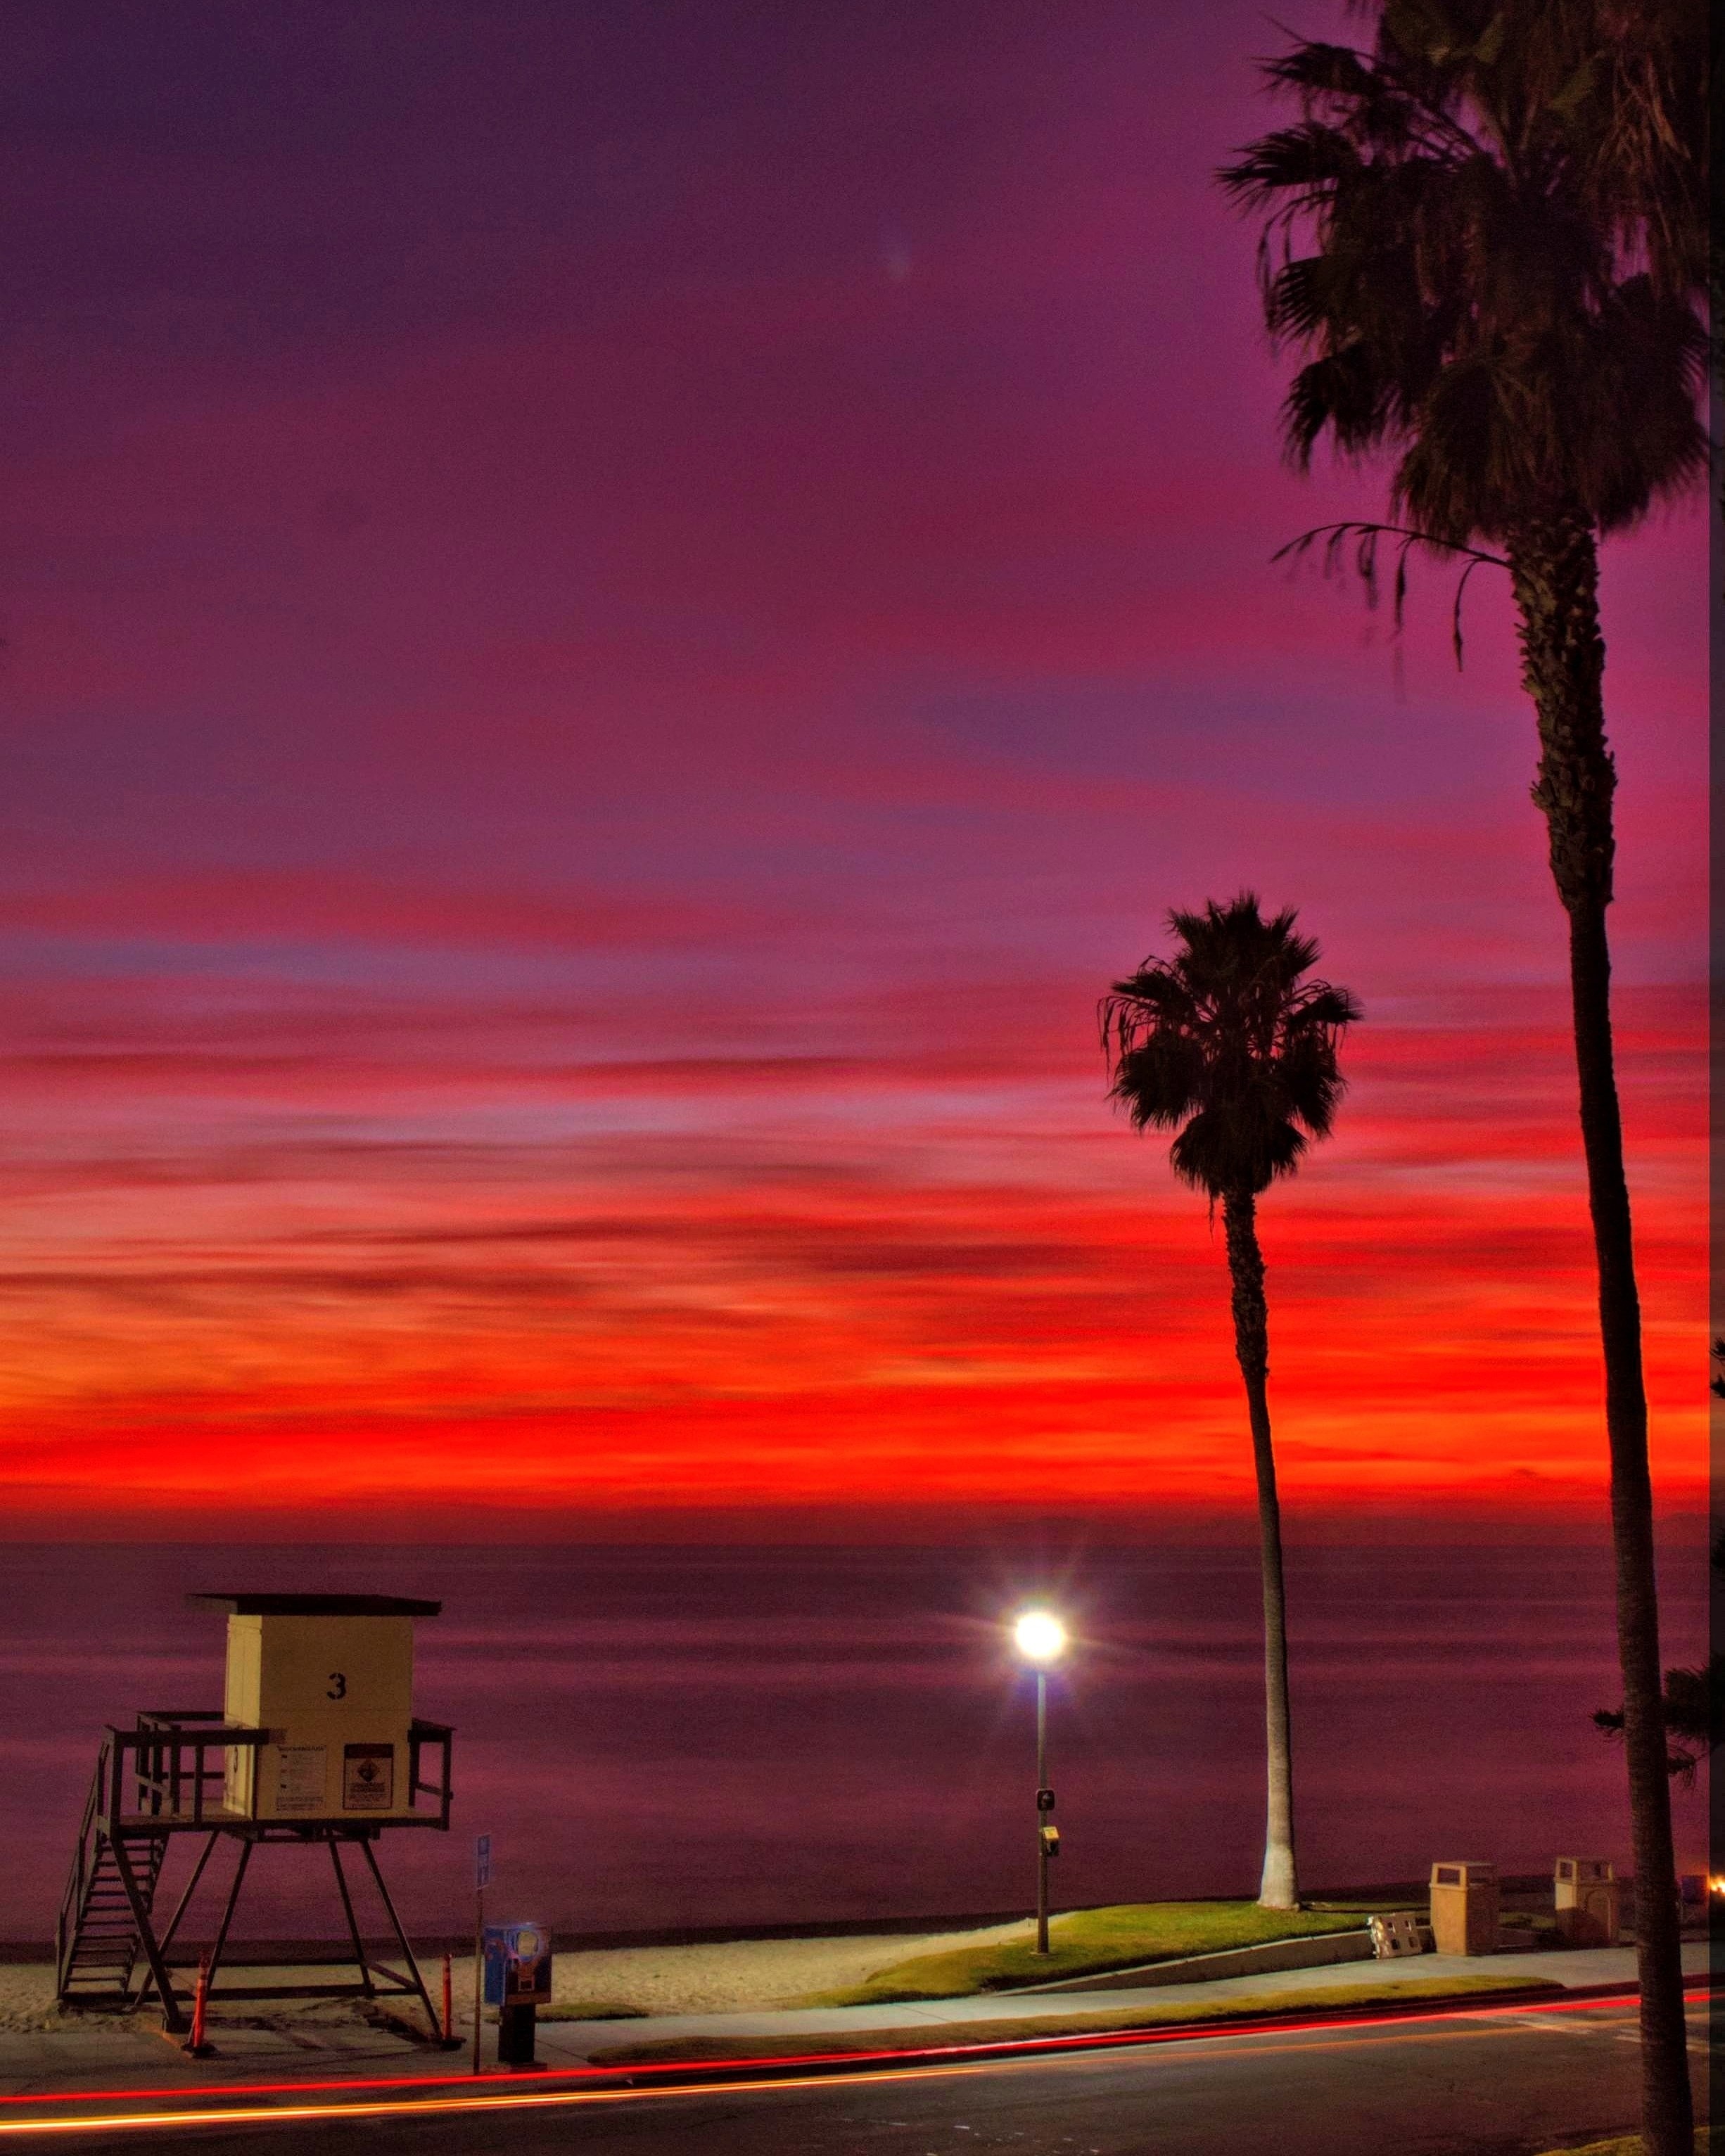 Life guard tower taken from pch 1 across from parking lot.


#lagunabeach
#sunset
#sonyalpha